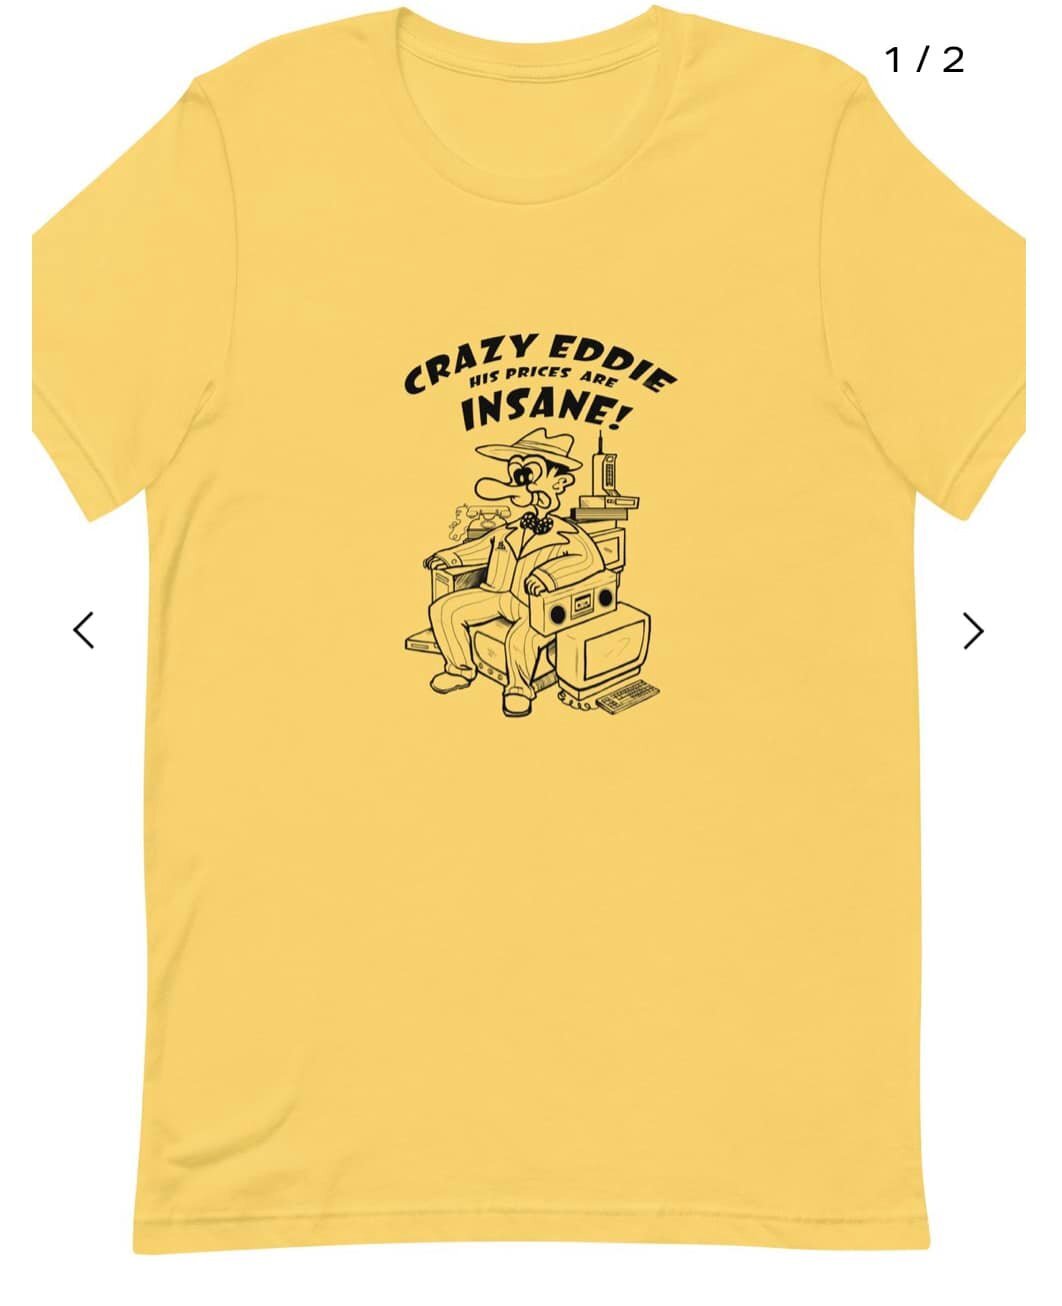 My original design tribute to both my dad and his entire Crazy Eddie family.  My dad started working for CE in 1975, it&rsquo;s what I have known my entire life. It&rsquo;s available on our website for you to have a piece of history and keep those in